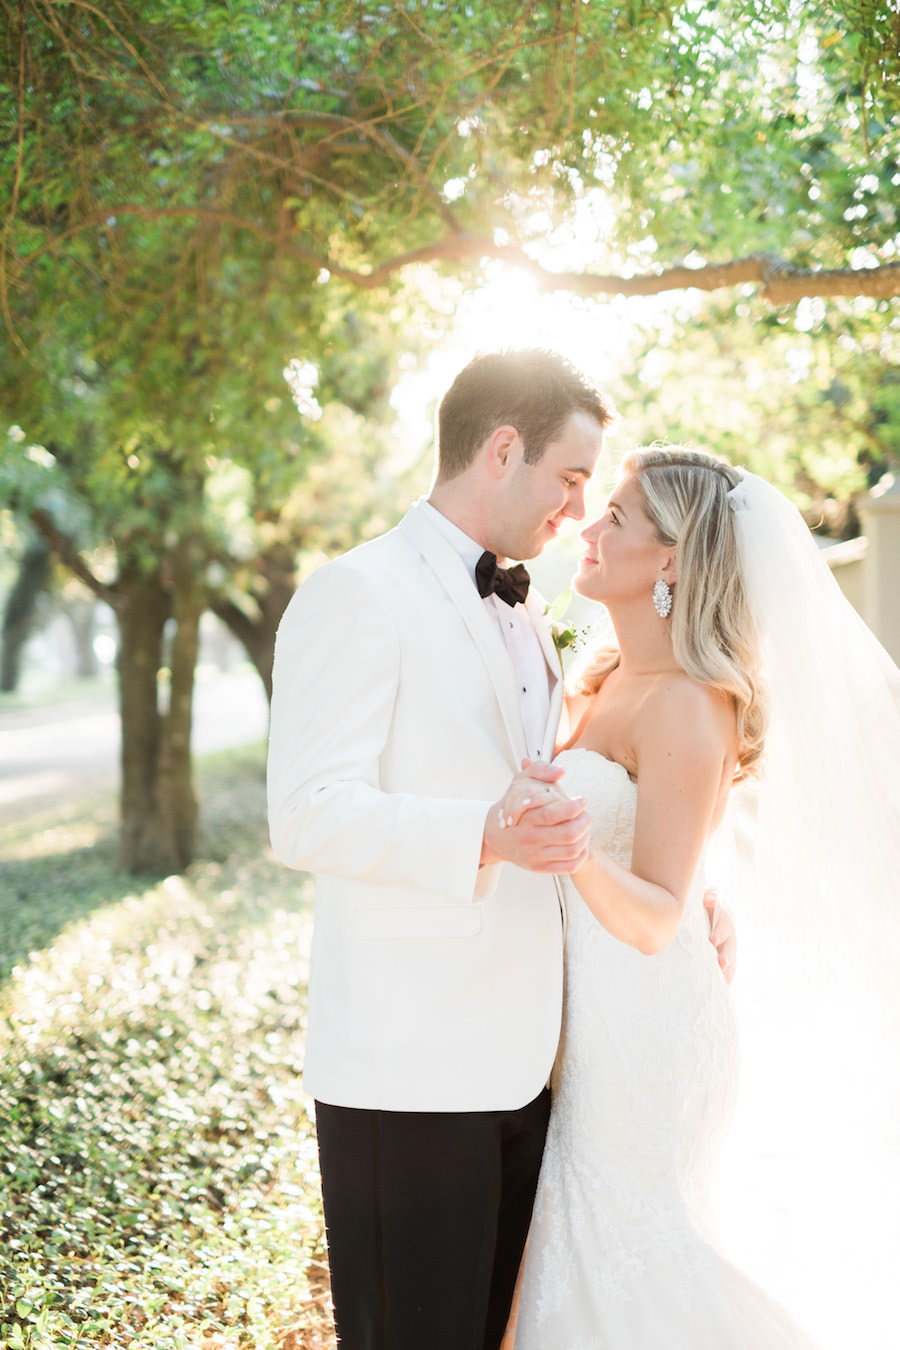 Outdoor, Bride and Groom Tampa Wedding Portrait in White Tuxedo Jacket and Strapless, Lace Matthew Christopher Wedding Dress and Veil